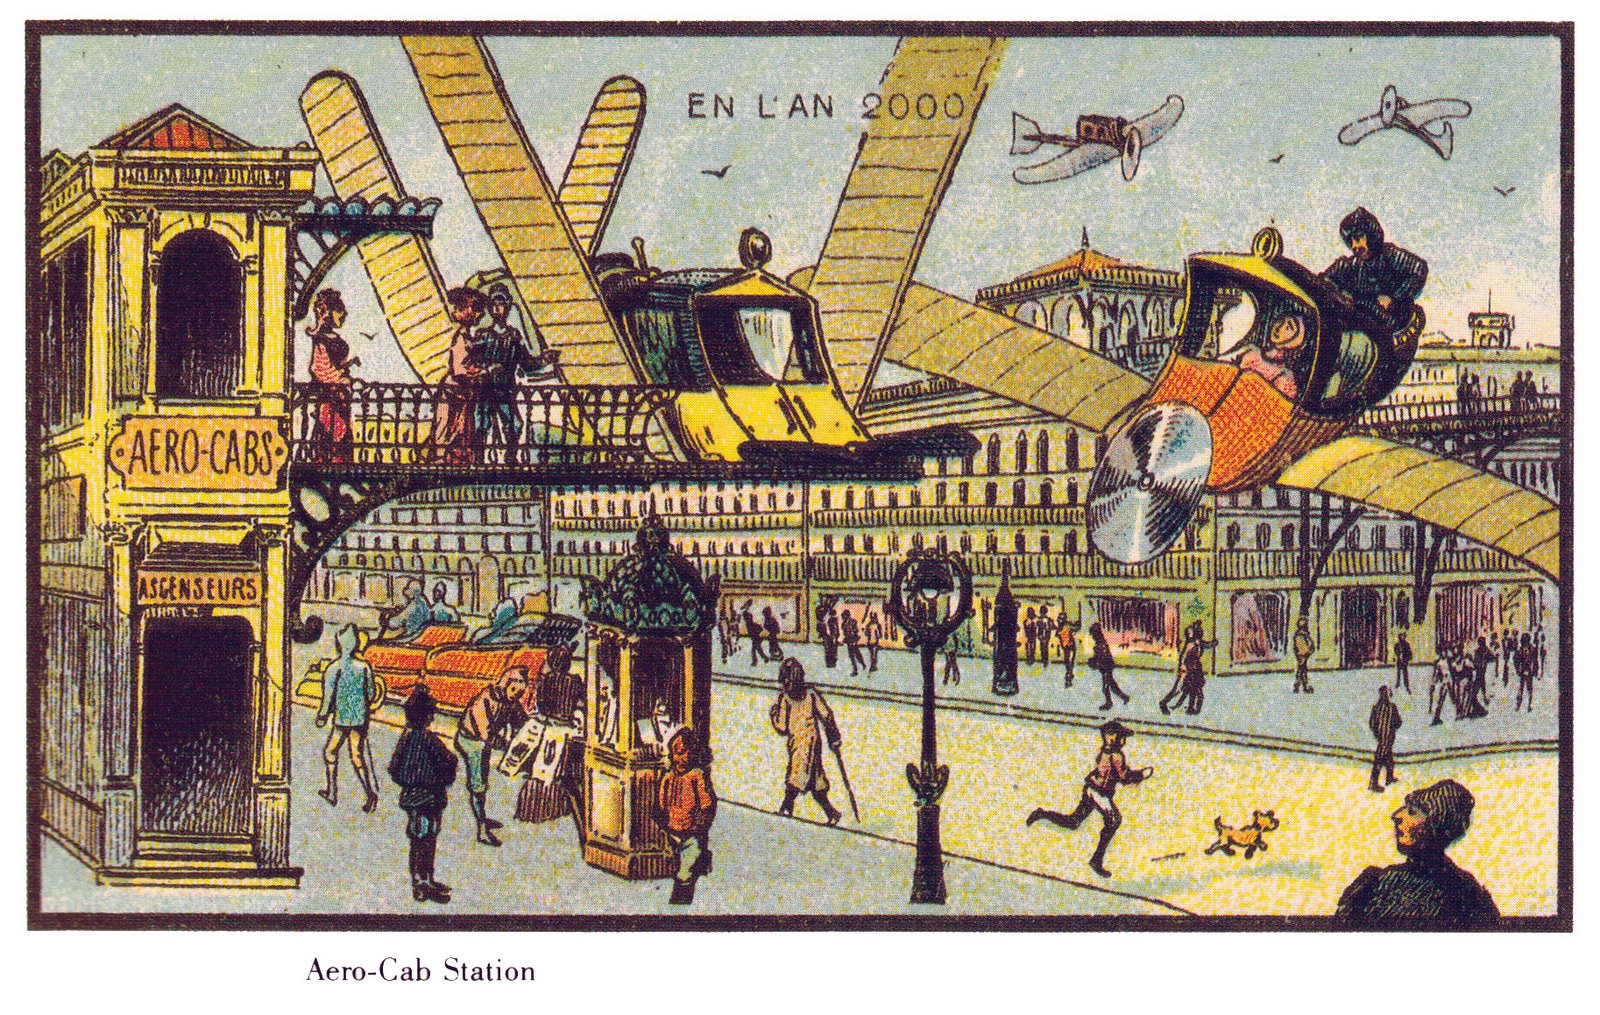 Victorian Visions of the Year 2000, Show How Present Assumptions